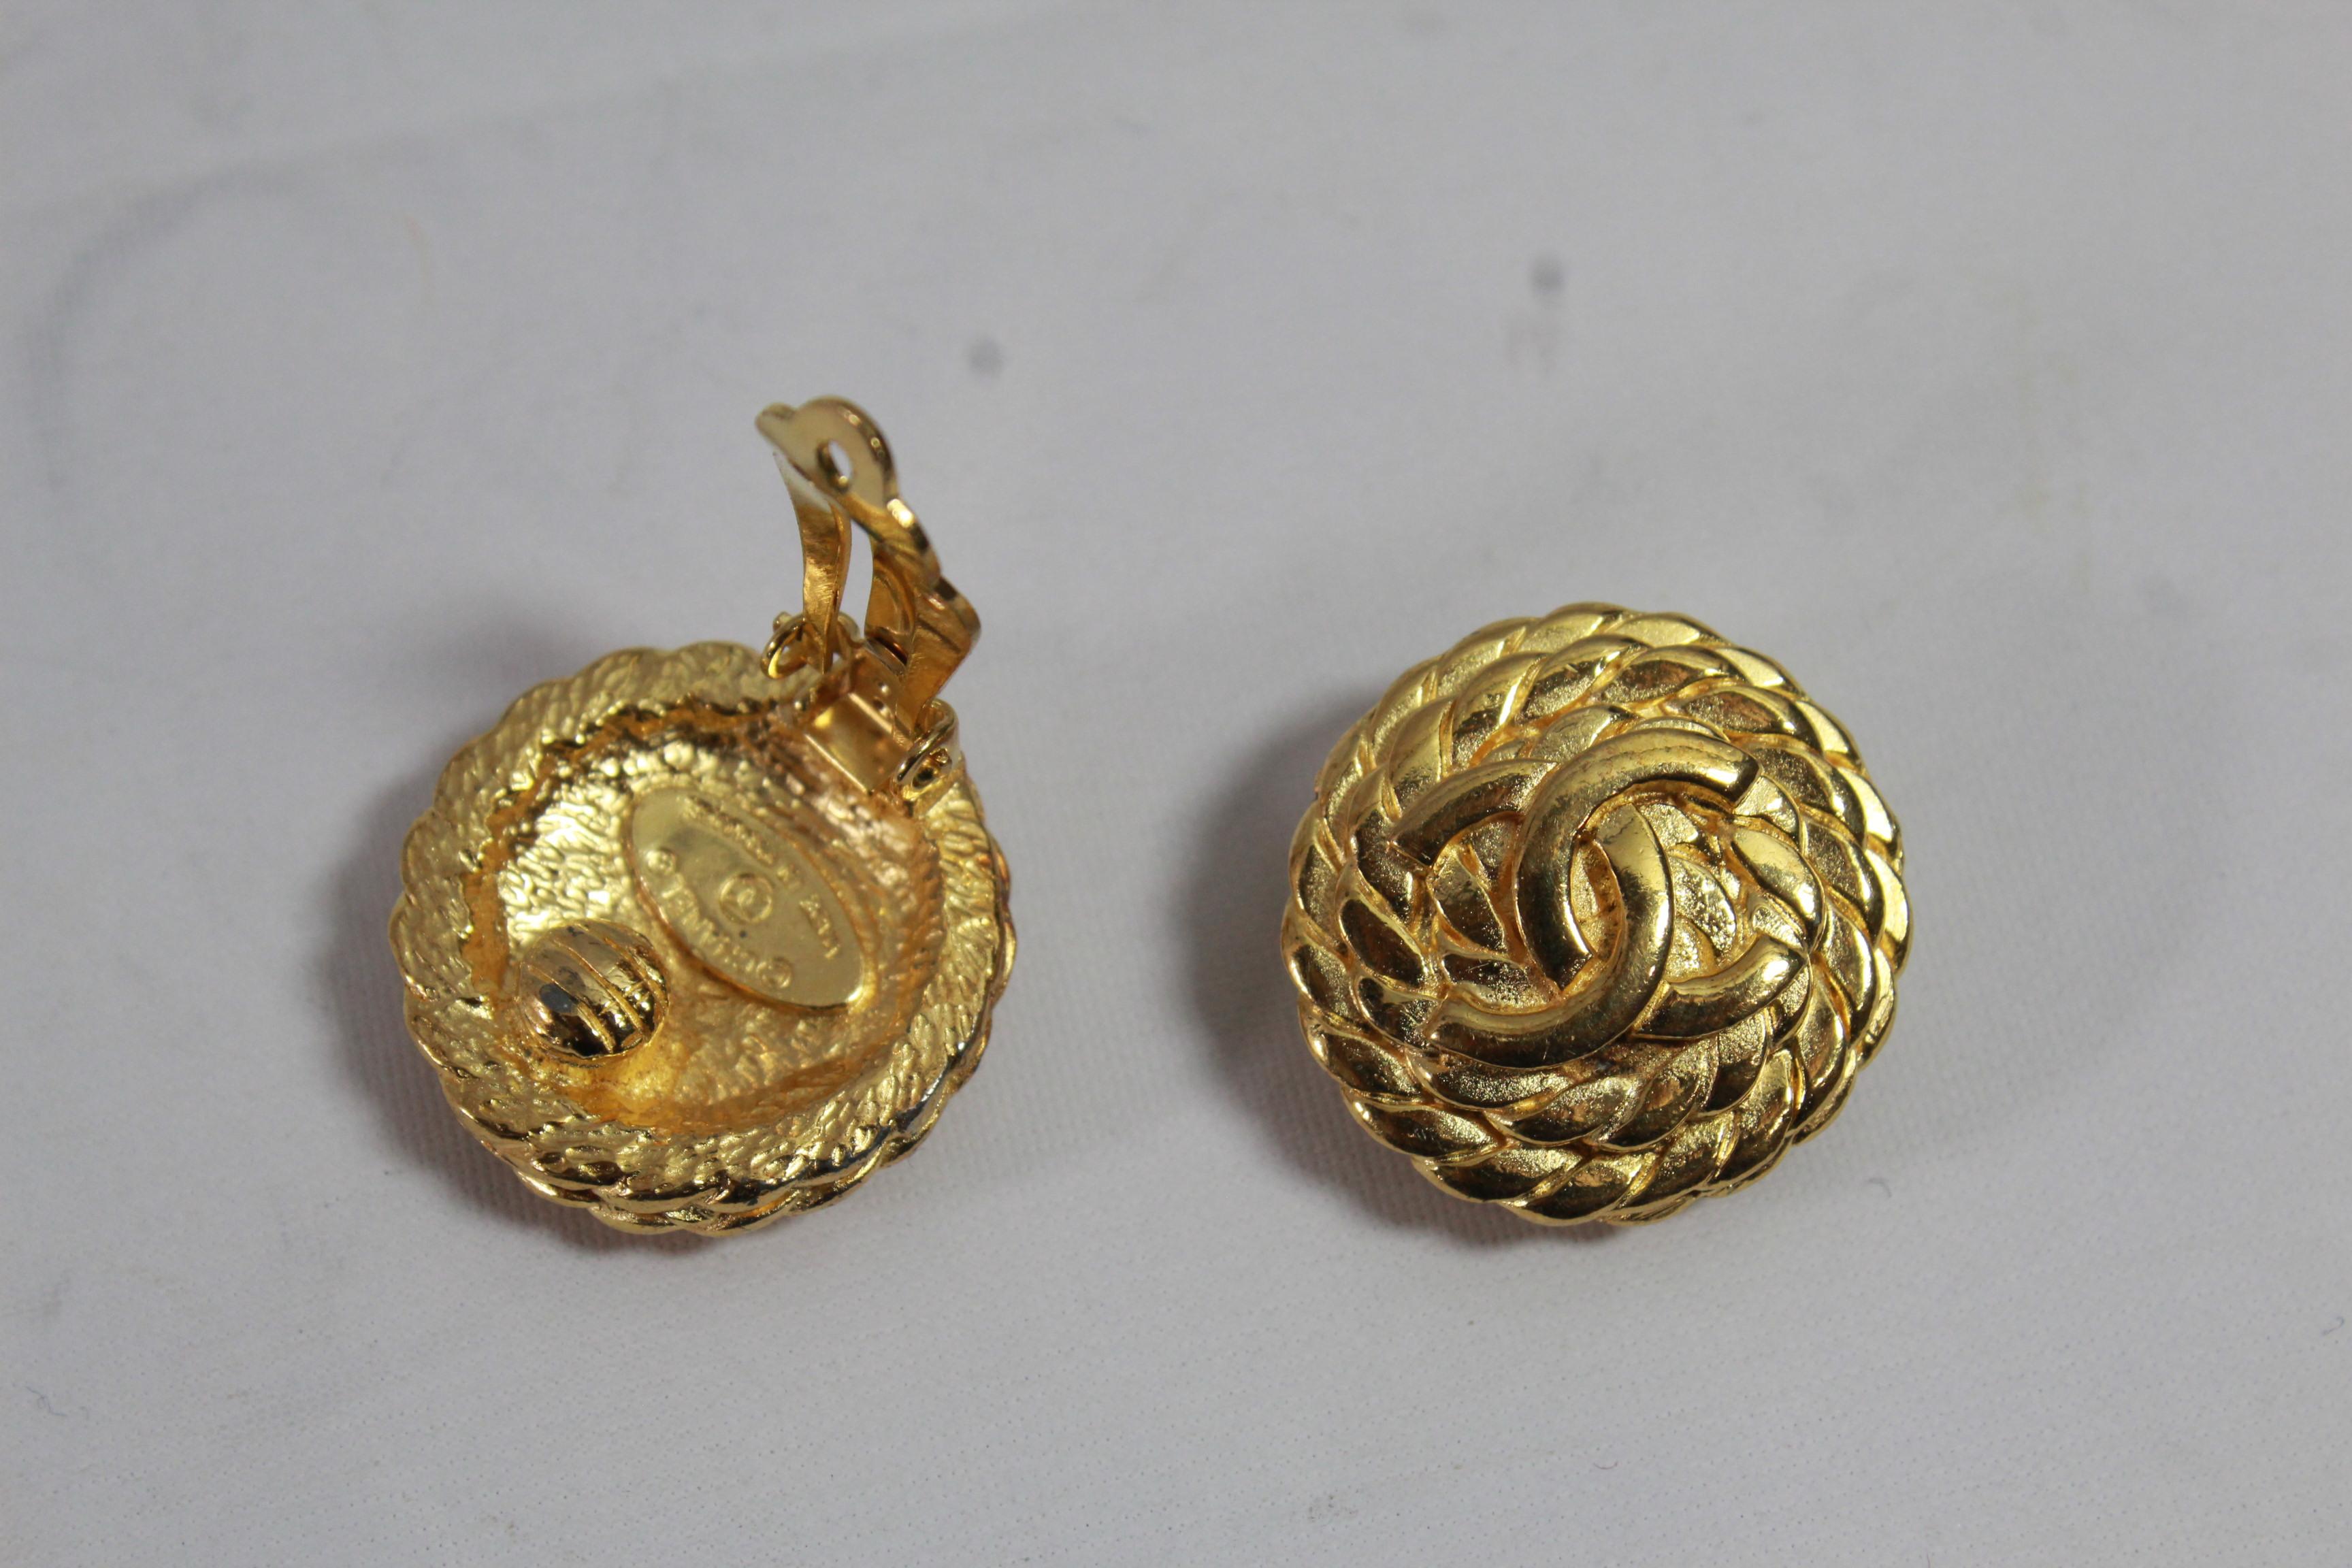 Vintage Chanel earrings in gold plated metal. 
Good vintage condition.
Size 2.5 cm
Clip system